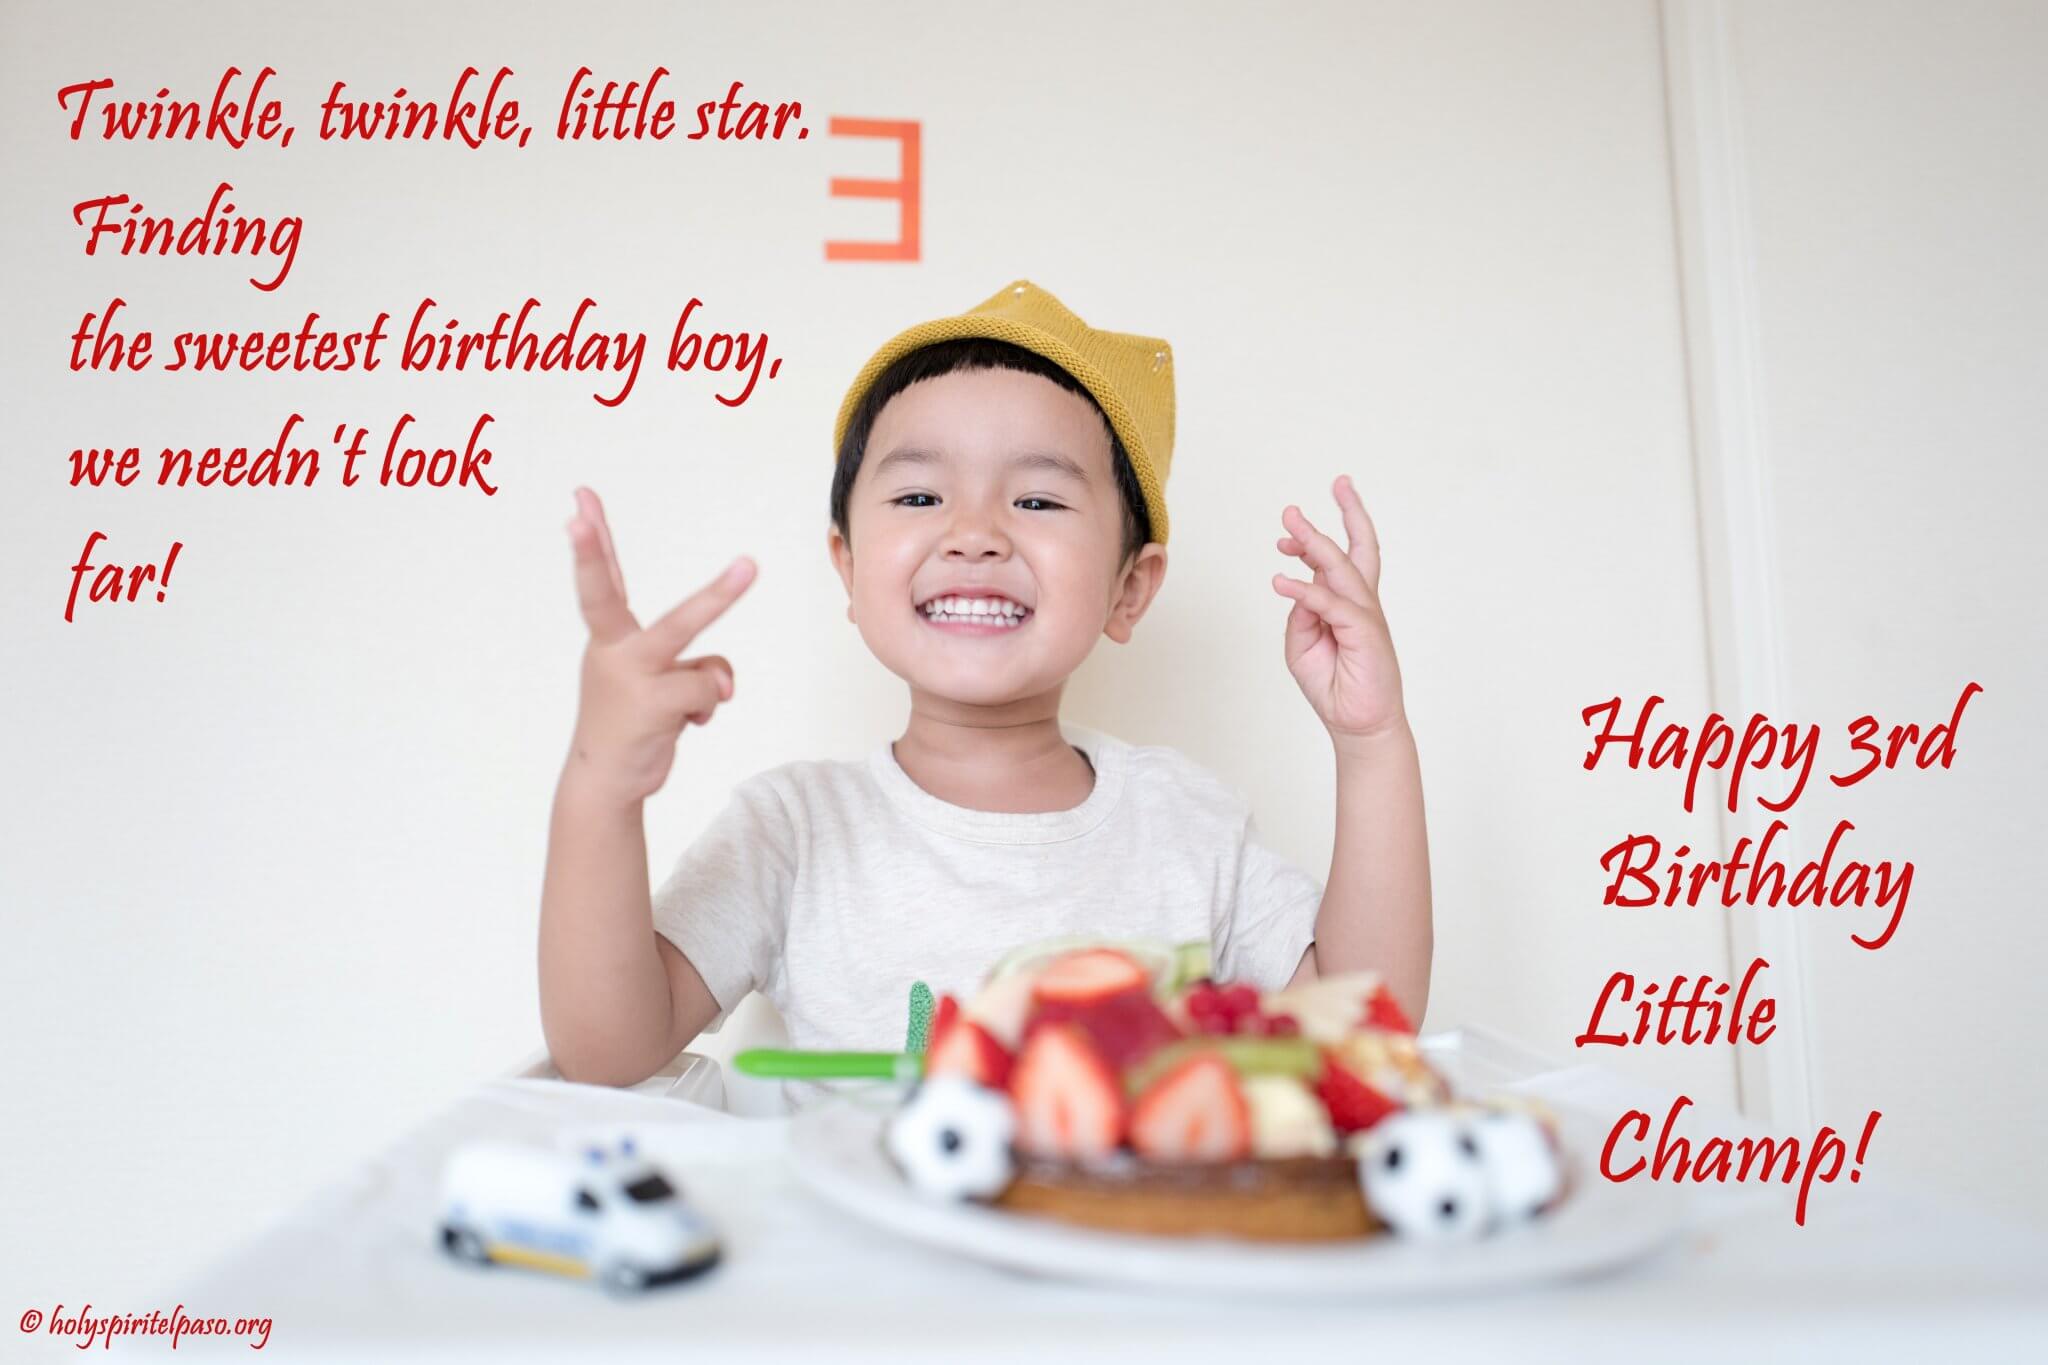 3rd Birthday Wishes Happy 3rd Birthday Quotes And Messages 